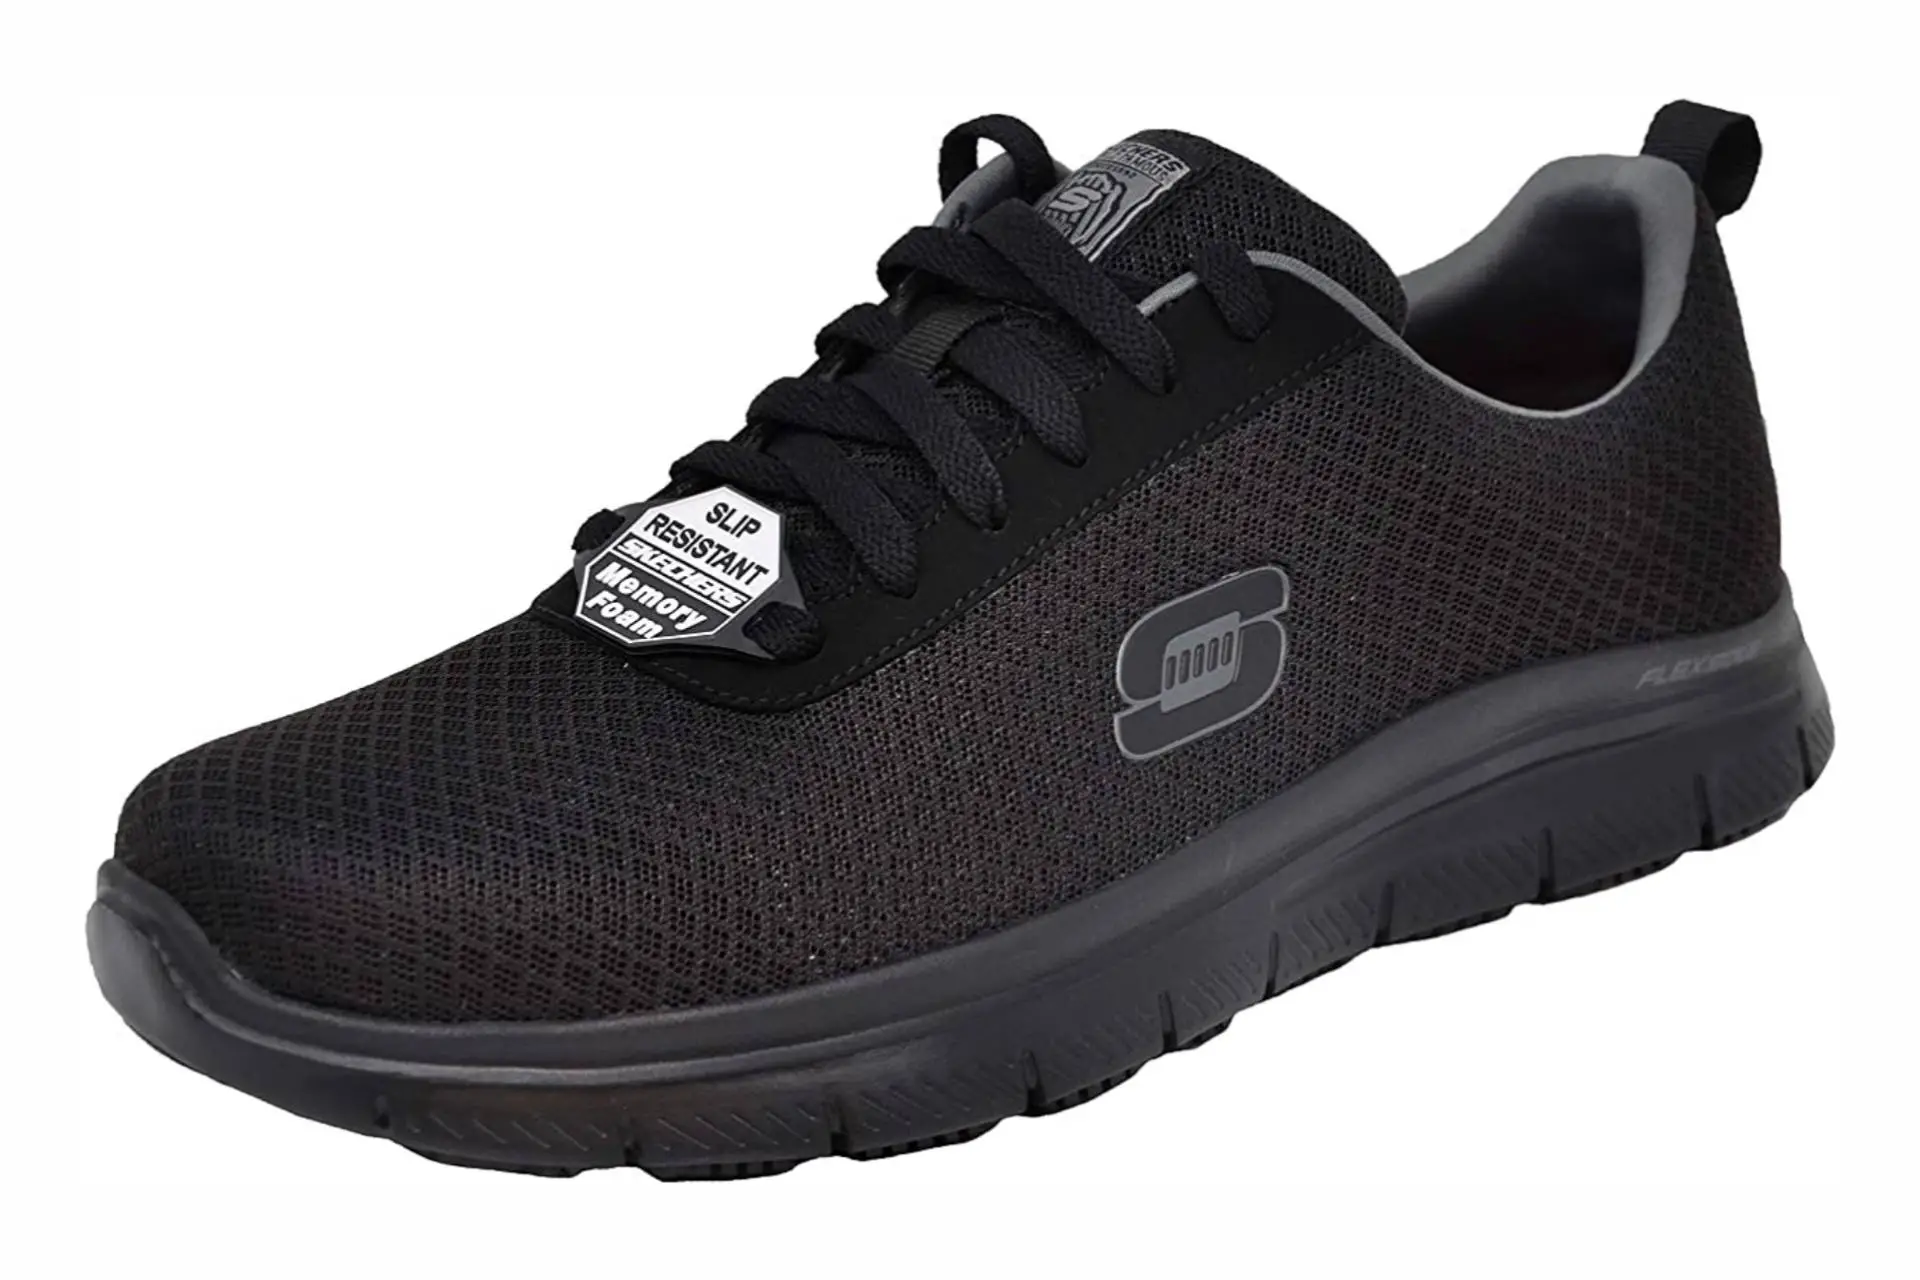 Best Skechers for arch support